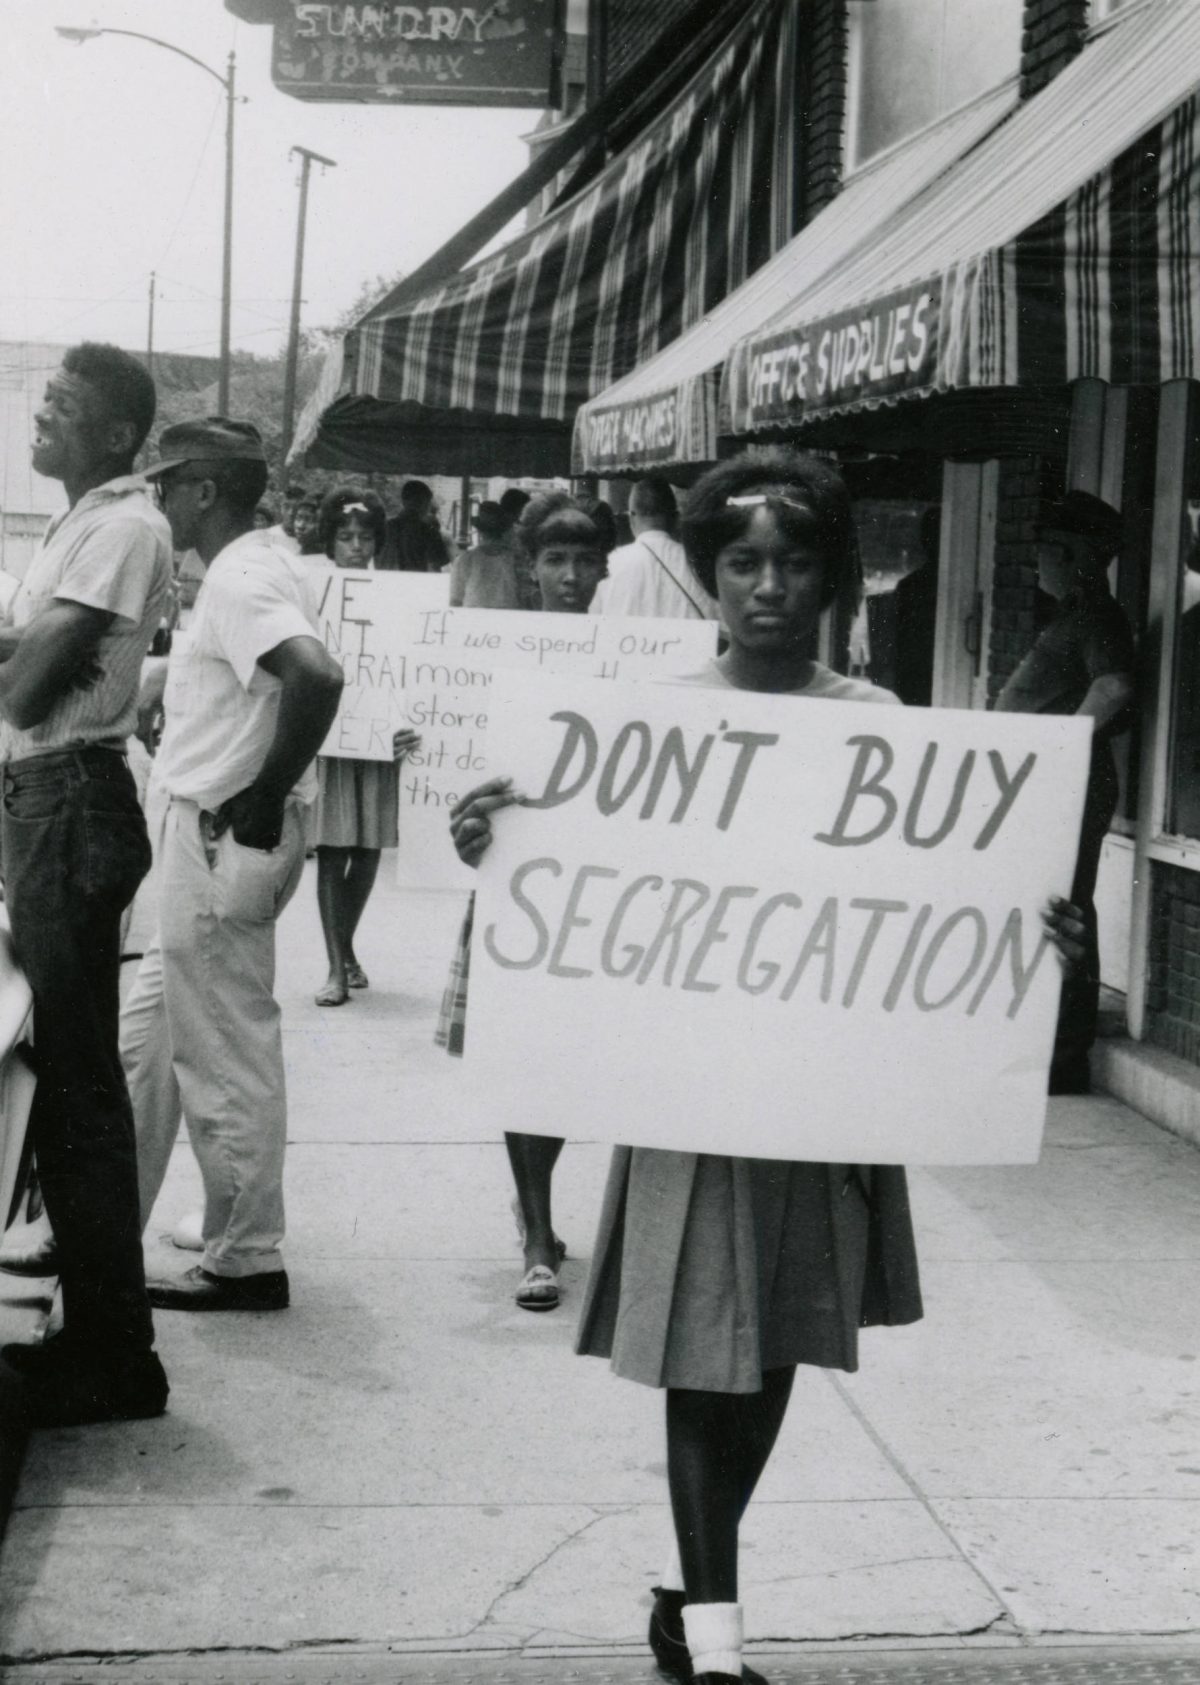 Don't Buy Segregation. Protesters near Southside Sundry and Southside Business Machines, Farmville, Va., July 1963